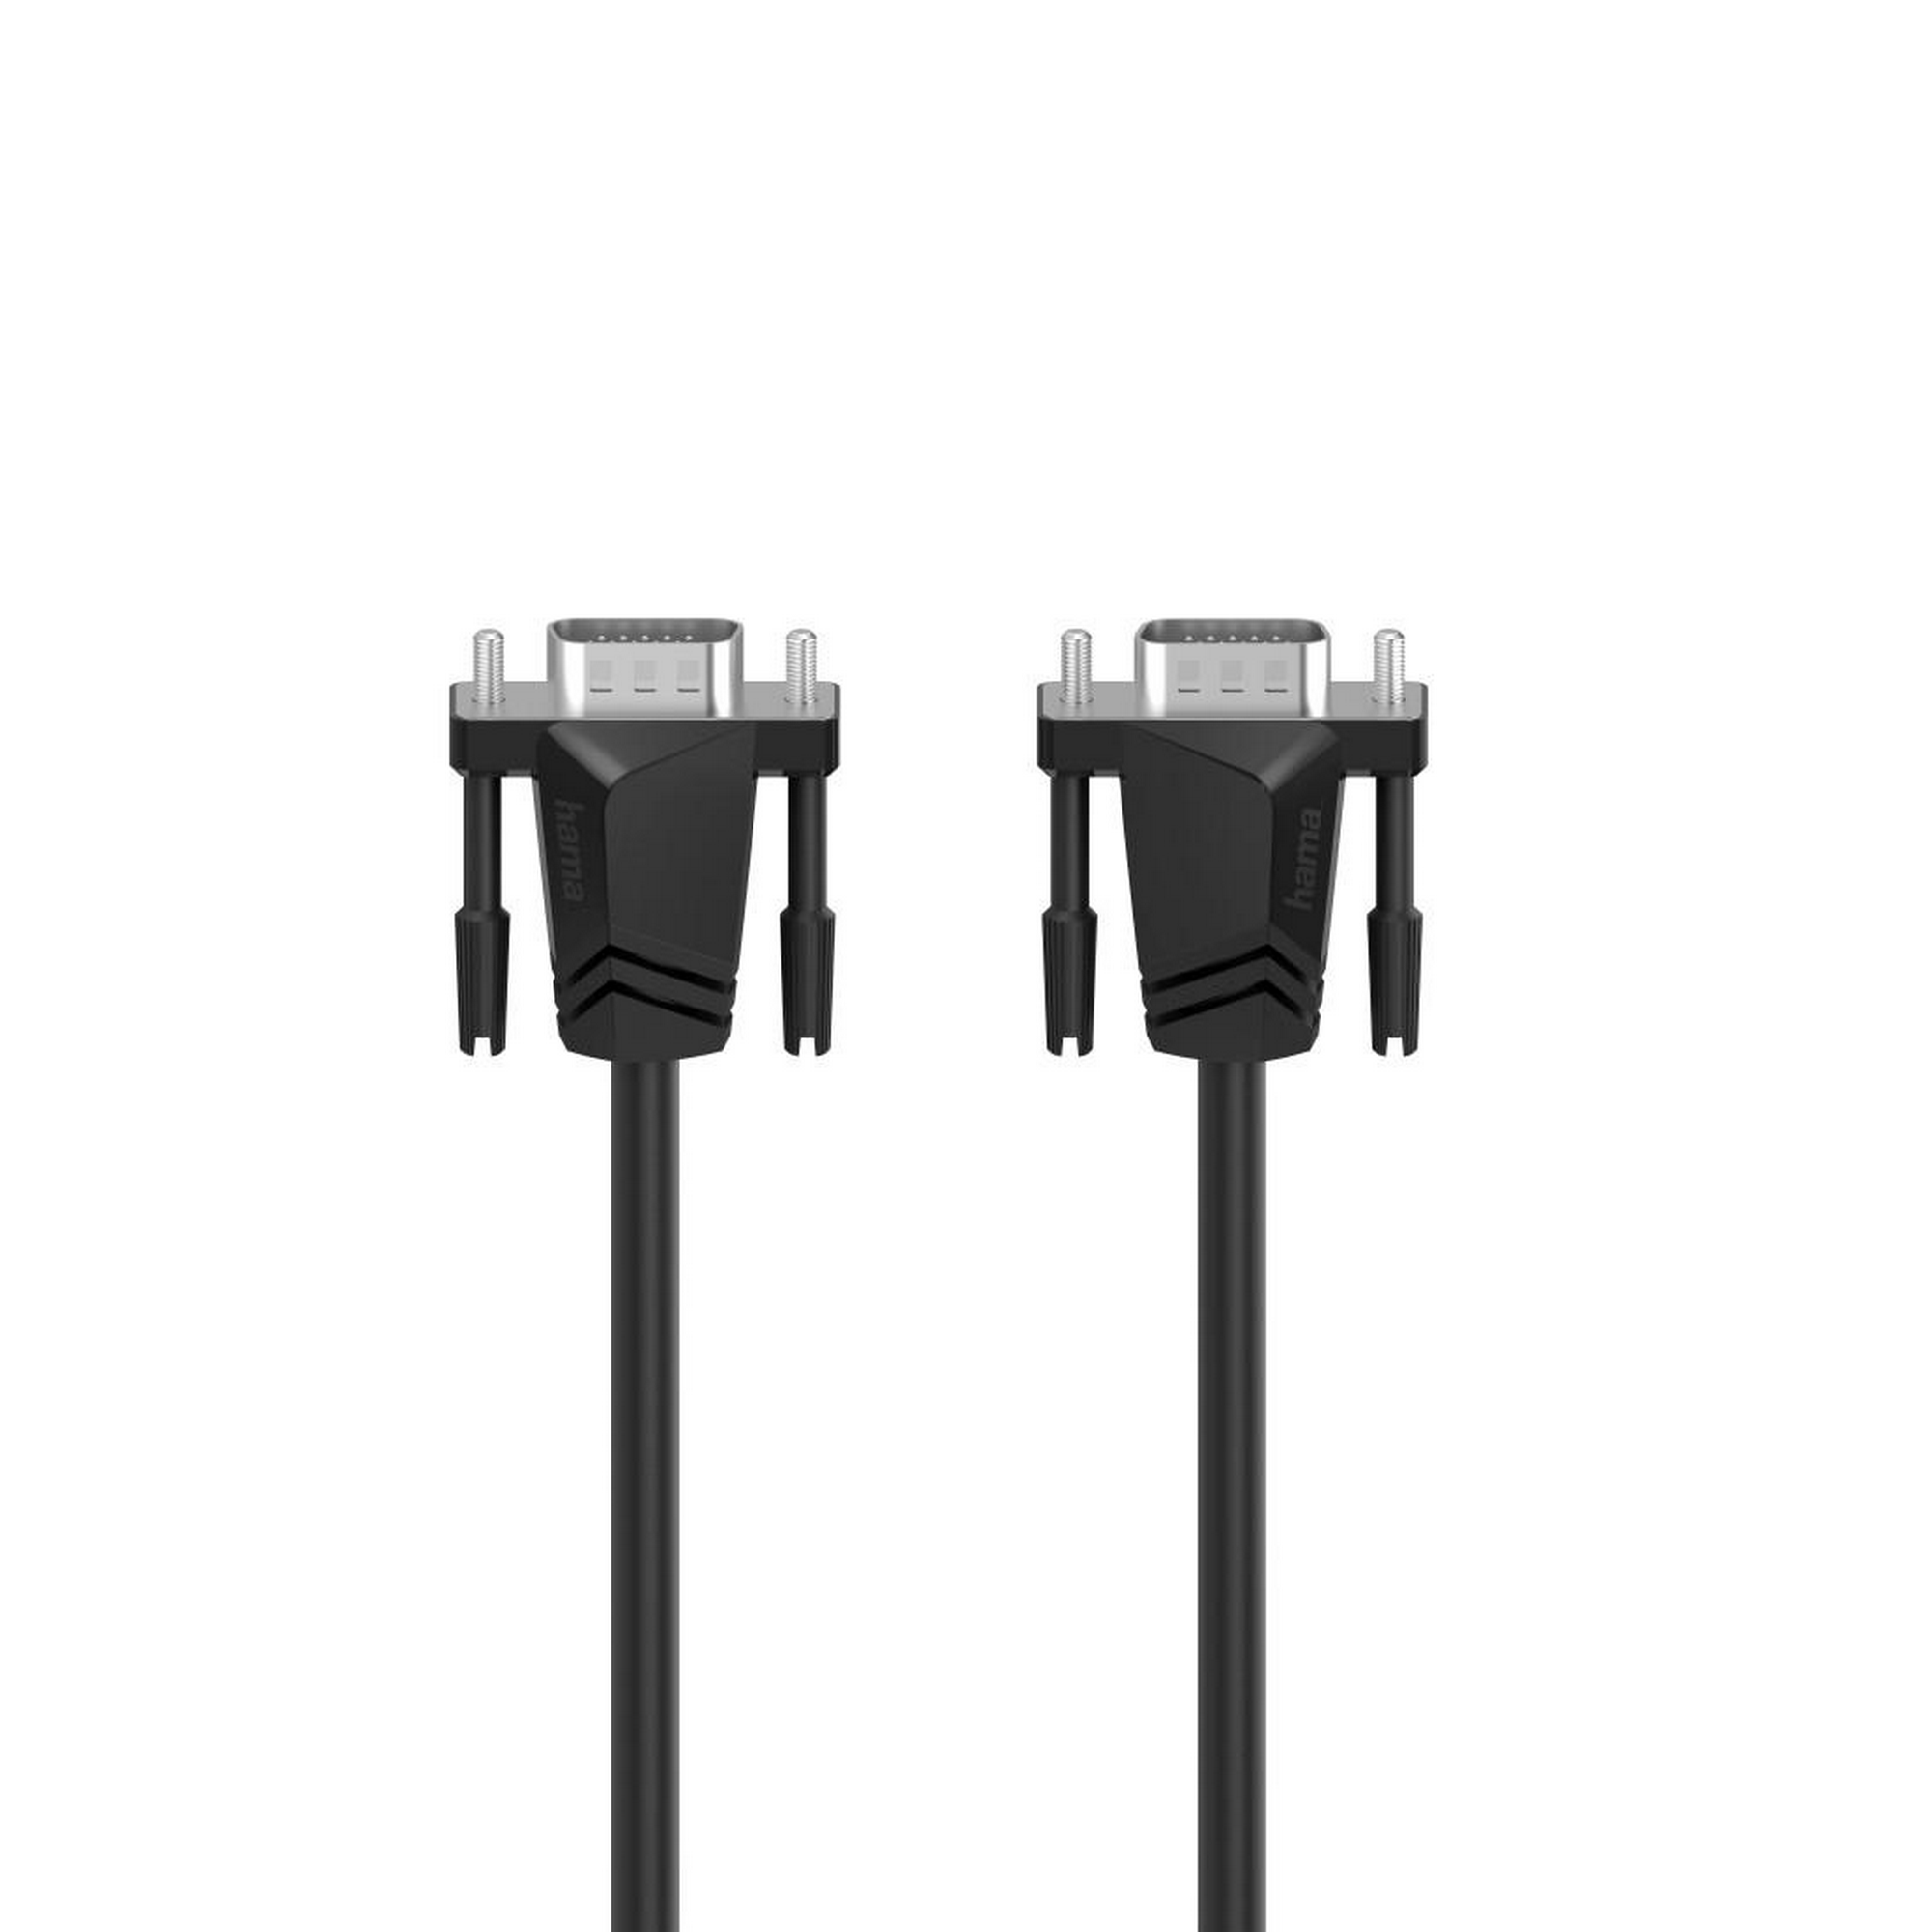 VGA-Kabel 'Essential Line' Full-HD 1080p schwarz 1,5 m + product picture